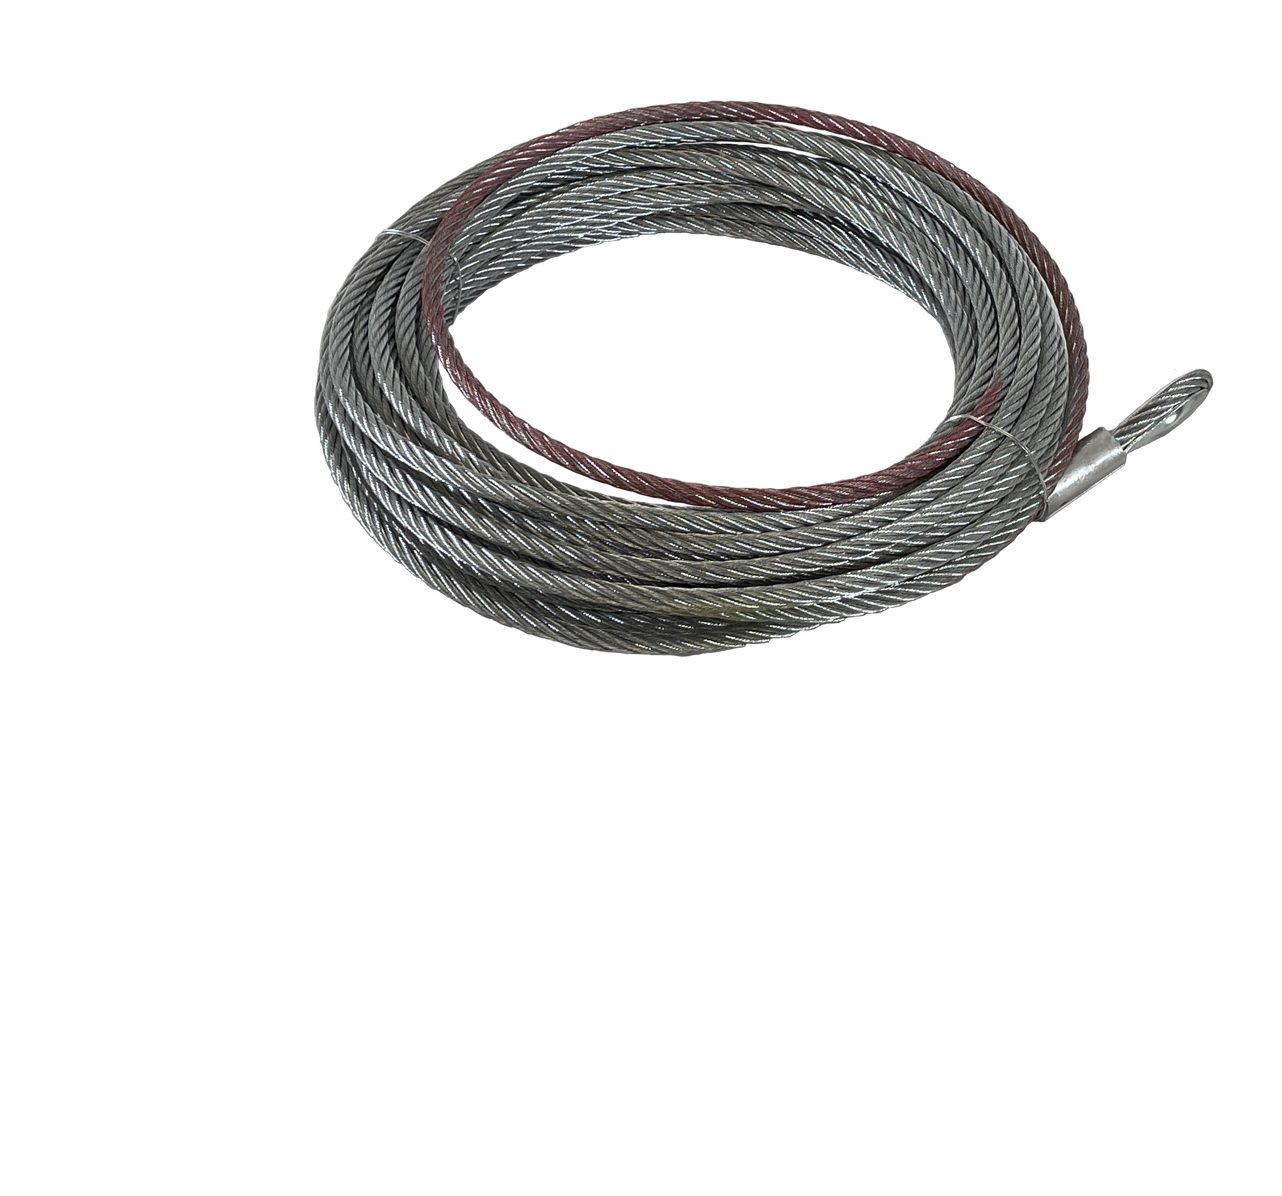 EX-FRW-100 Excavator Winch Steel Cable Replacement